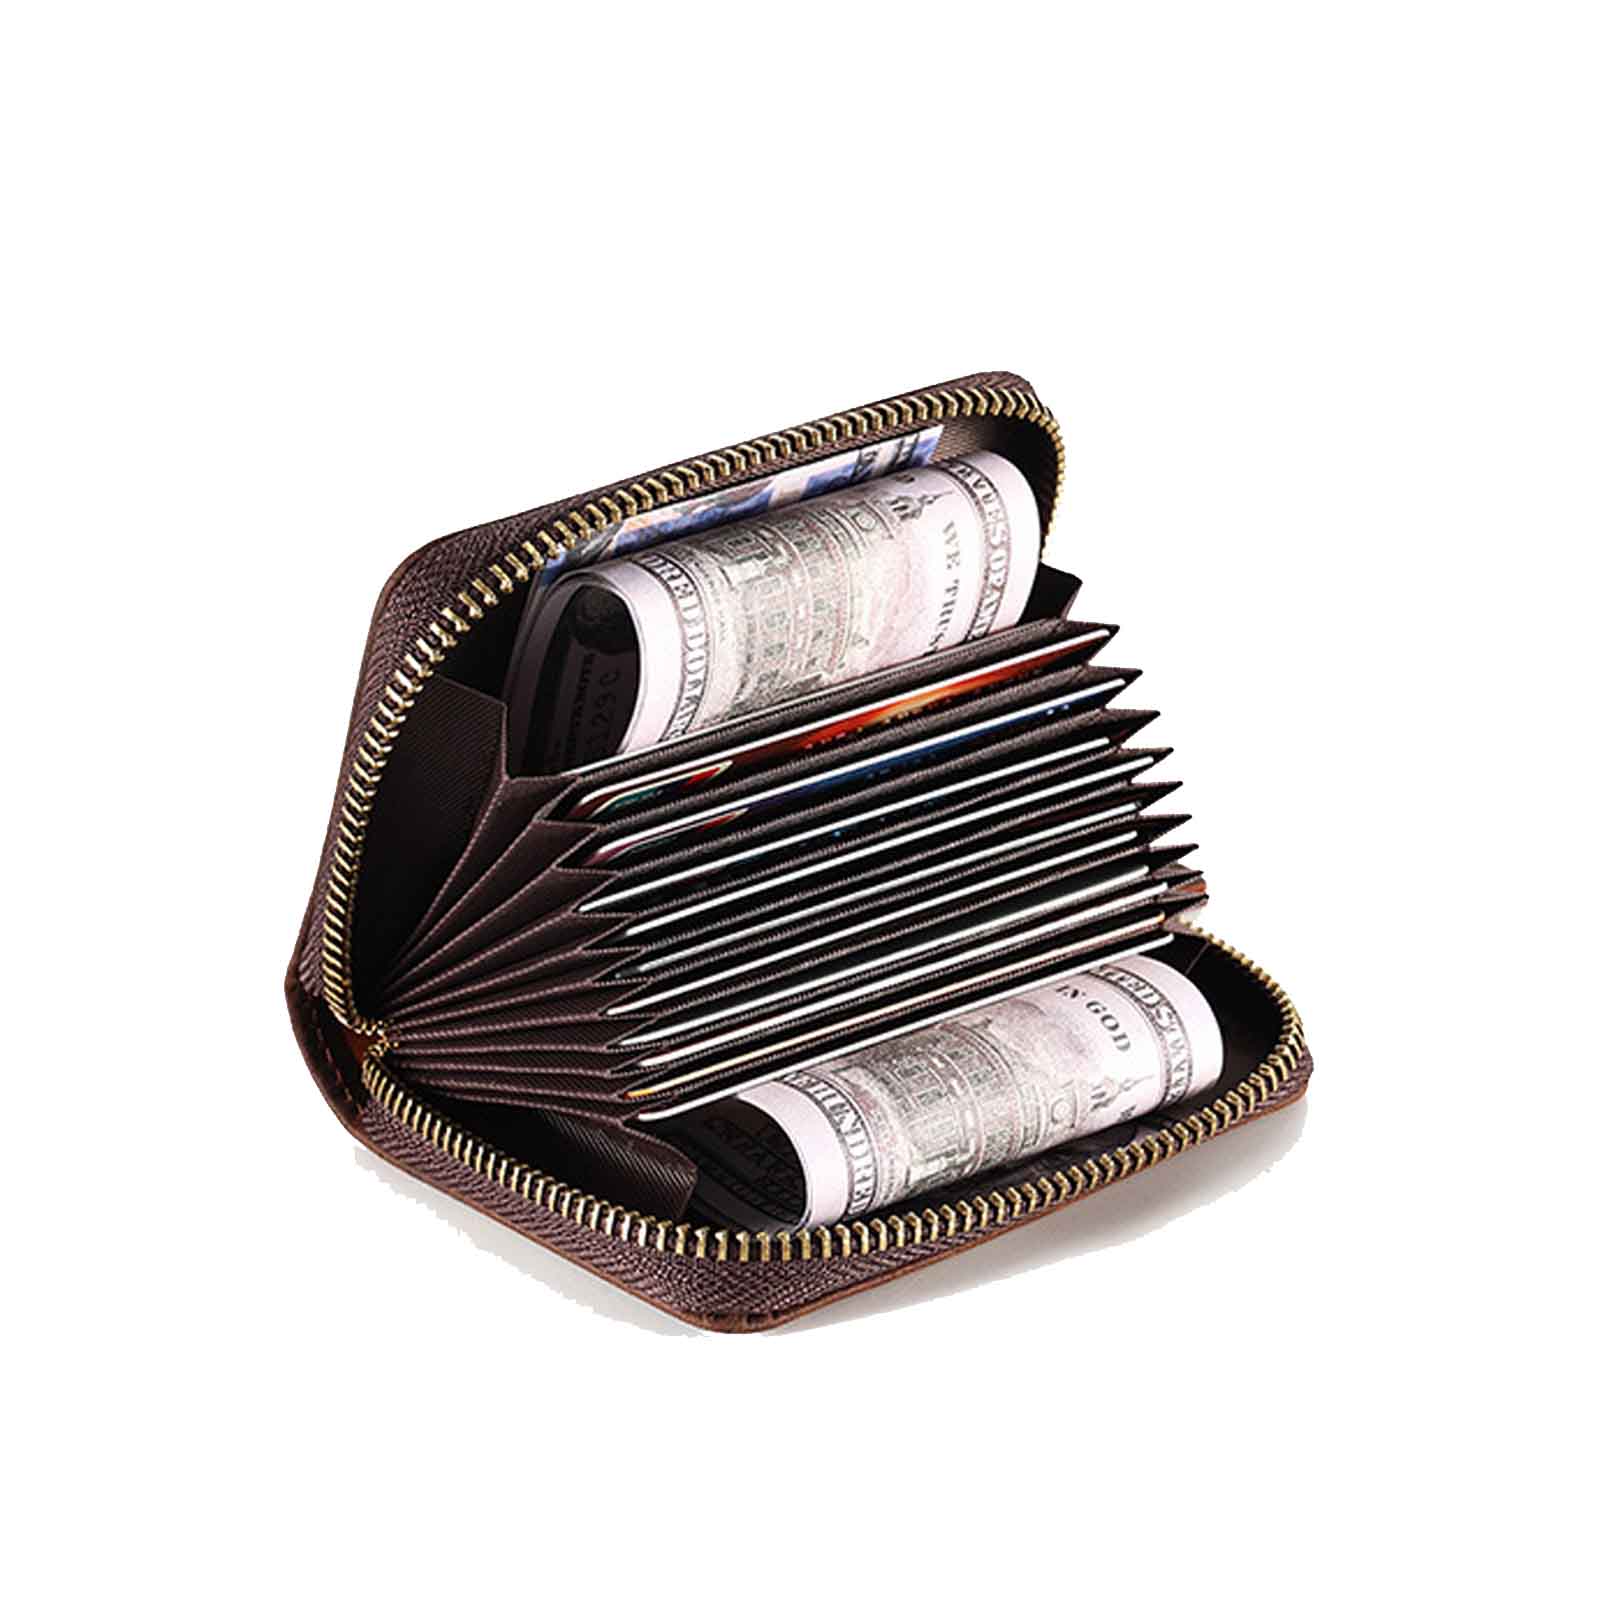 Leather Card Holder Wallet with Zipper